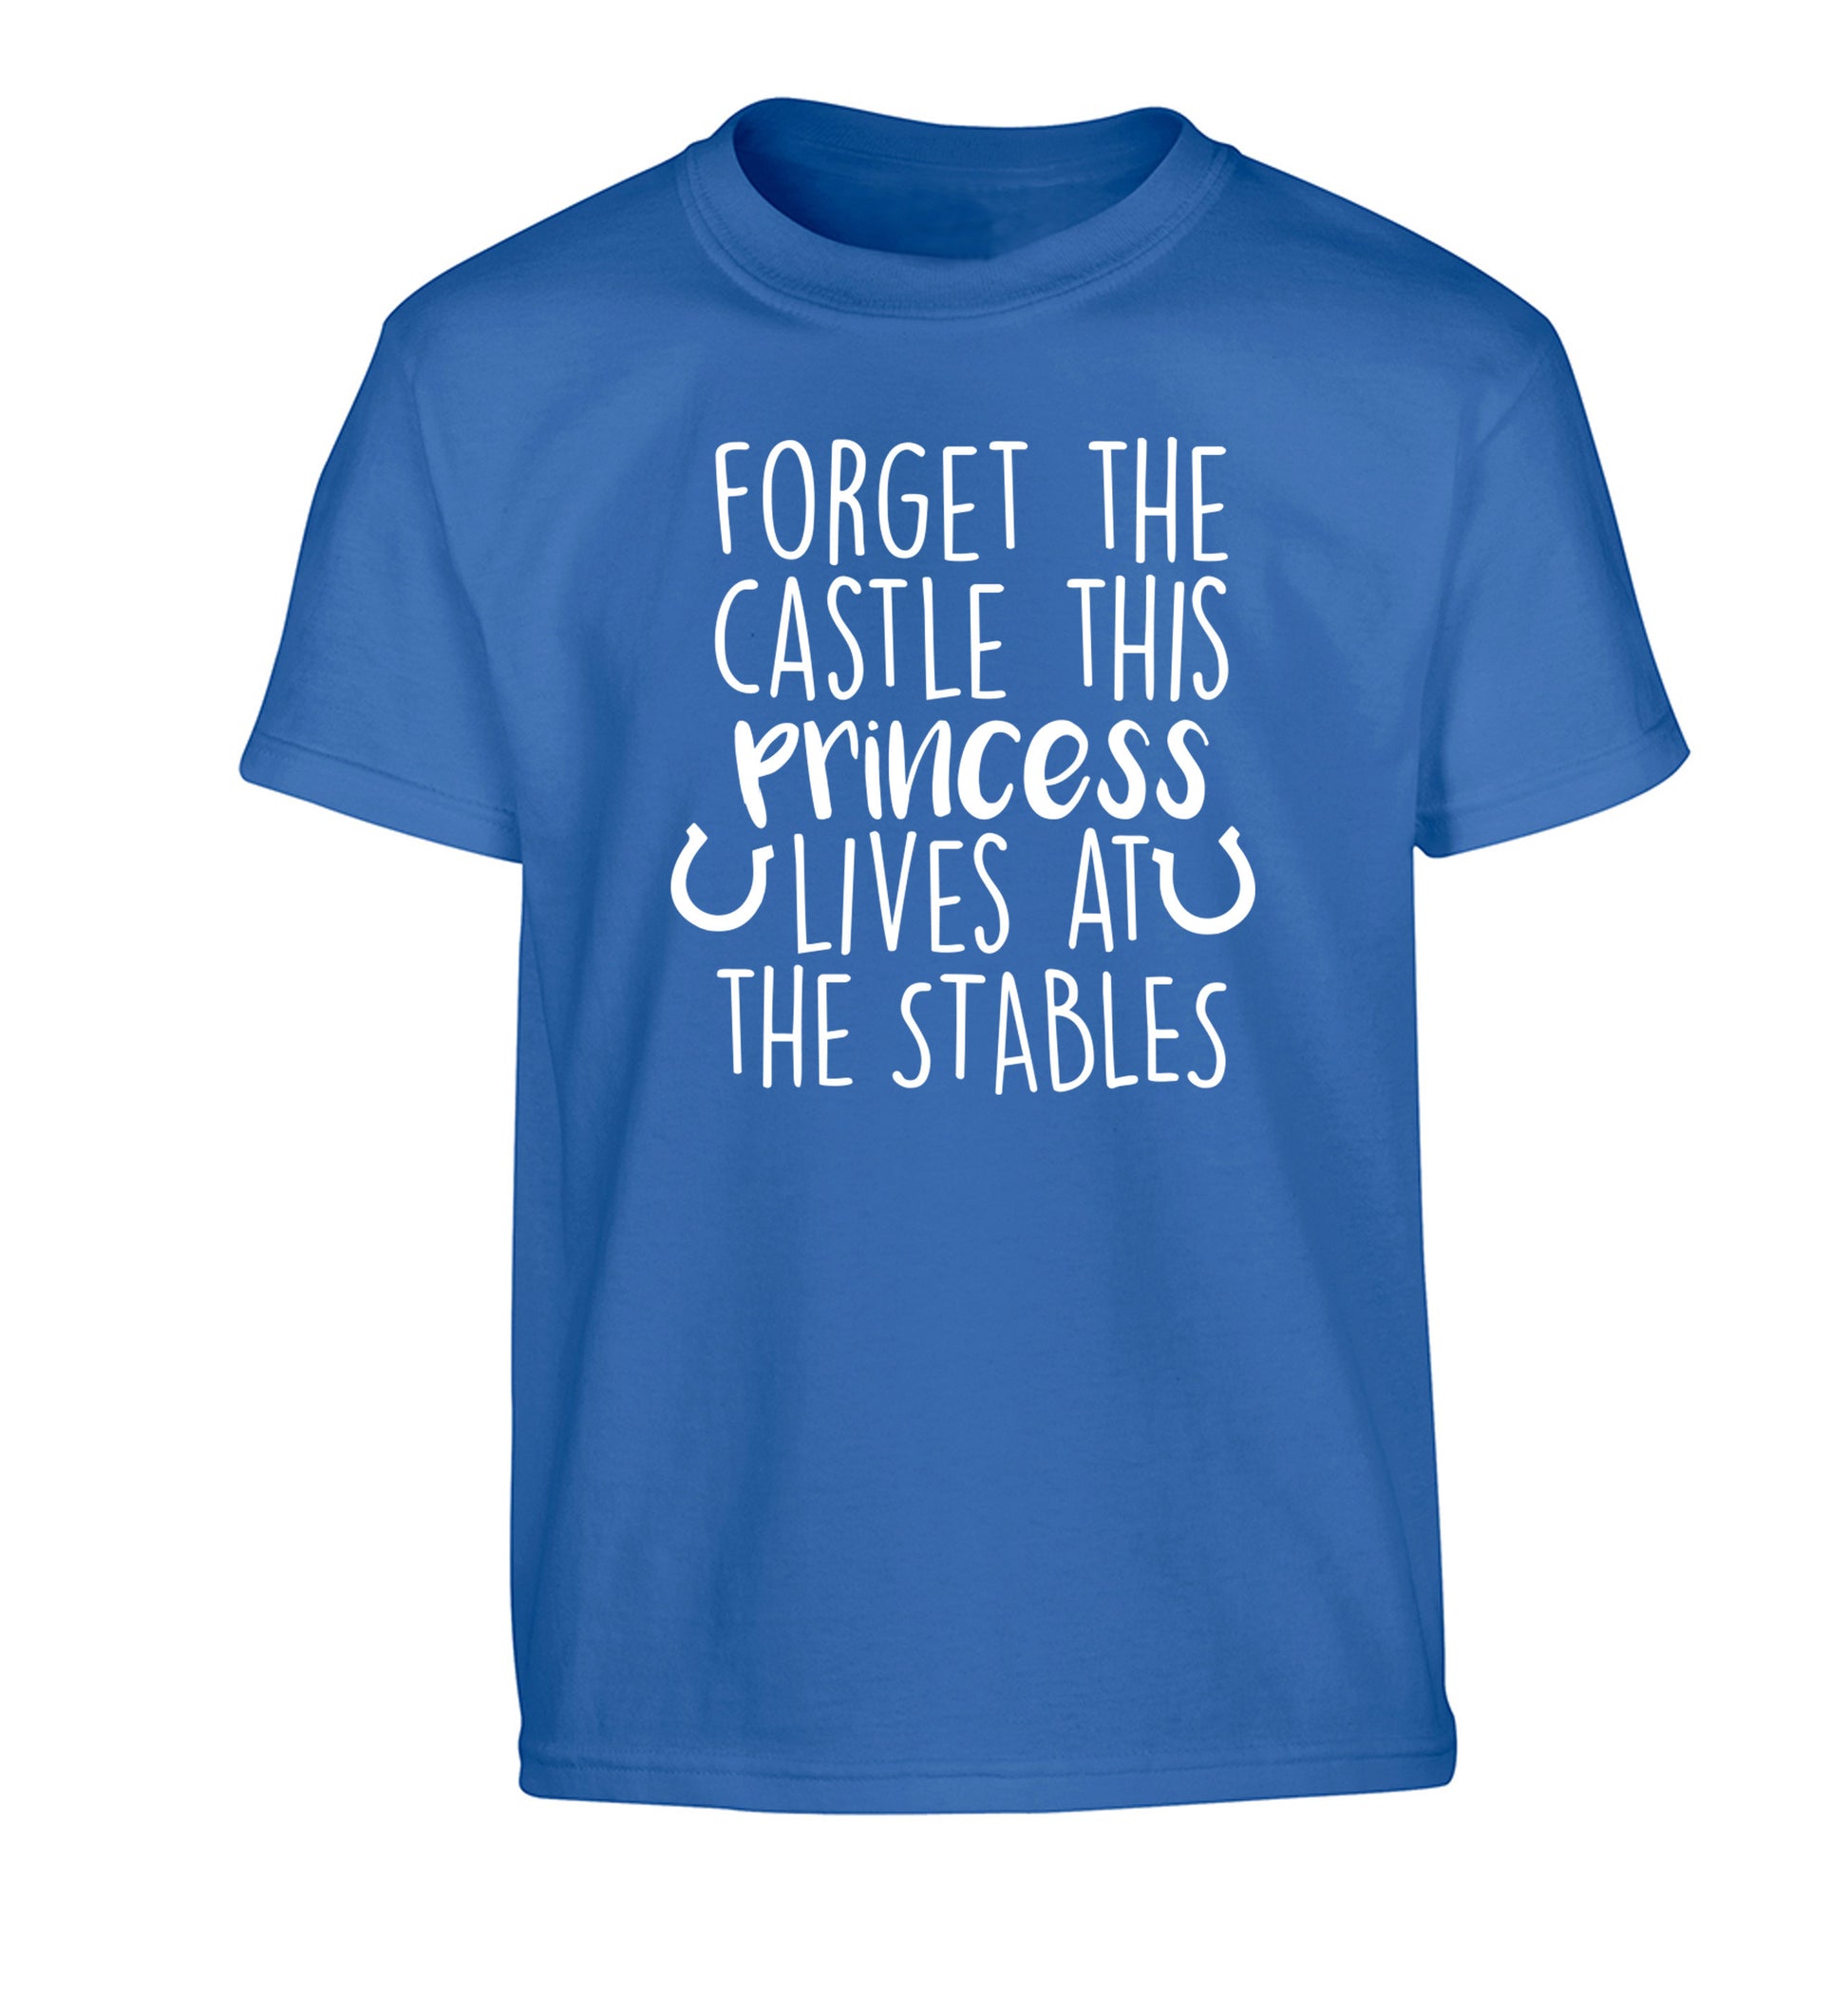 Forget the castle this princess lives at the stables Children's blue Tshirt 12-14 Years